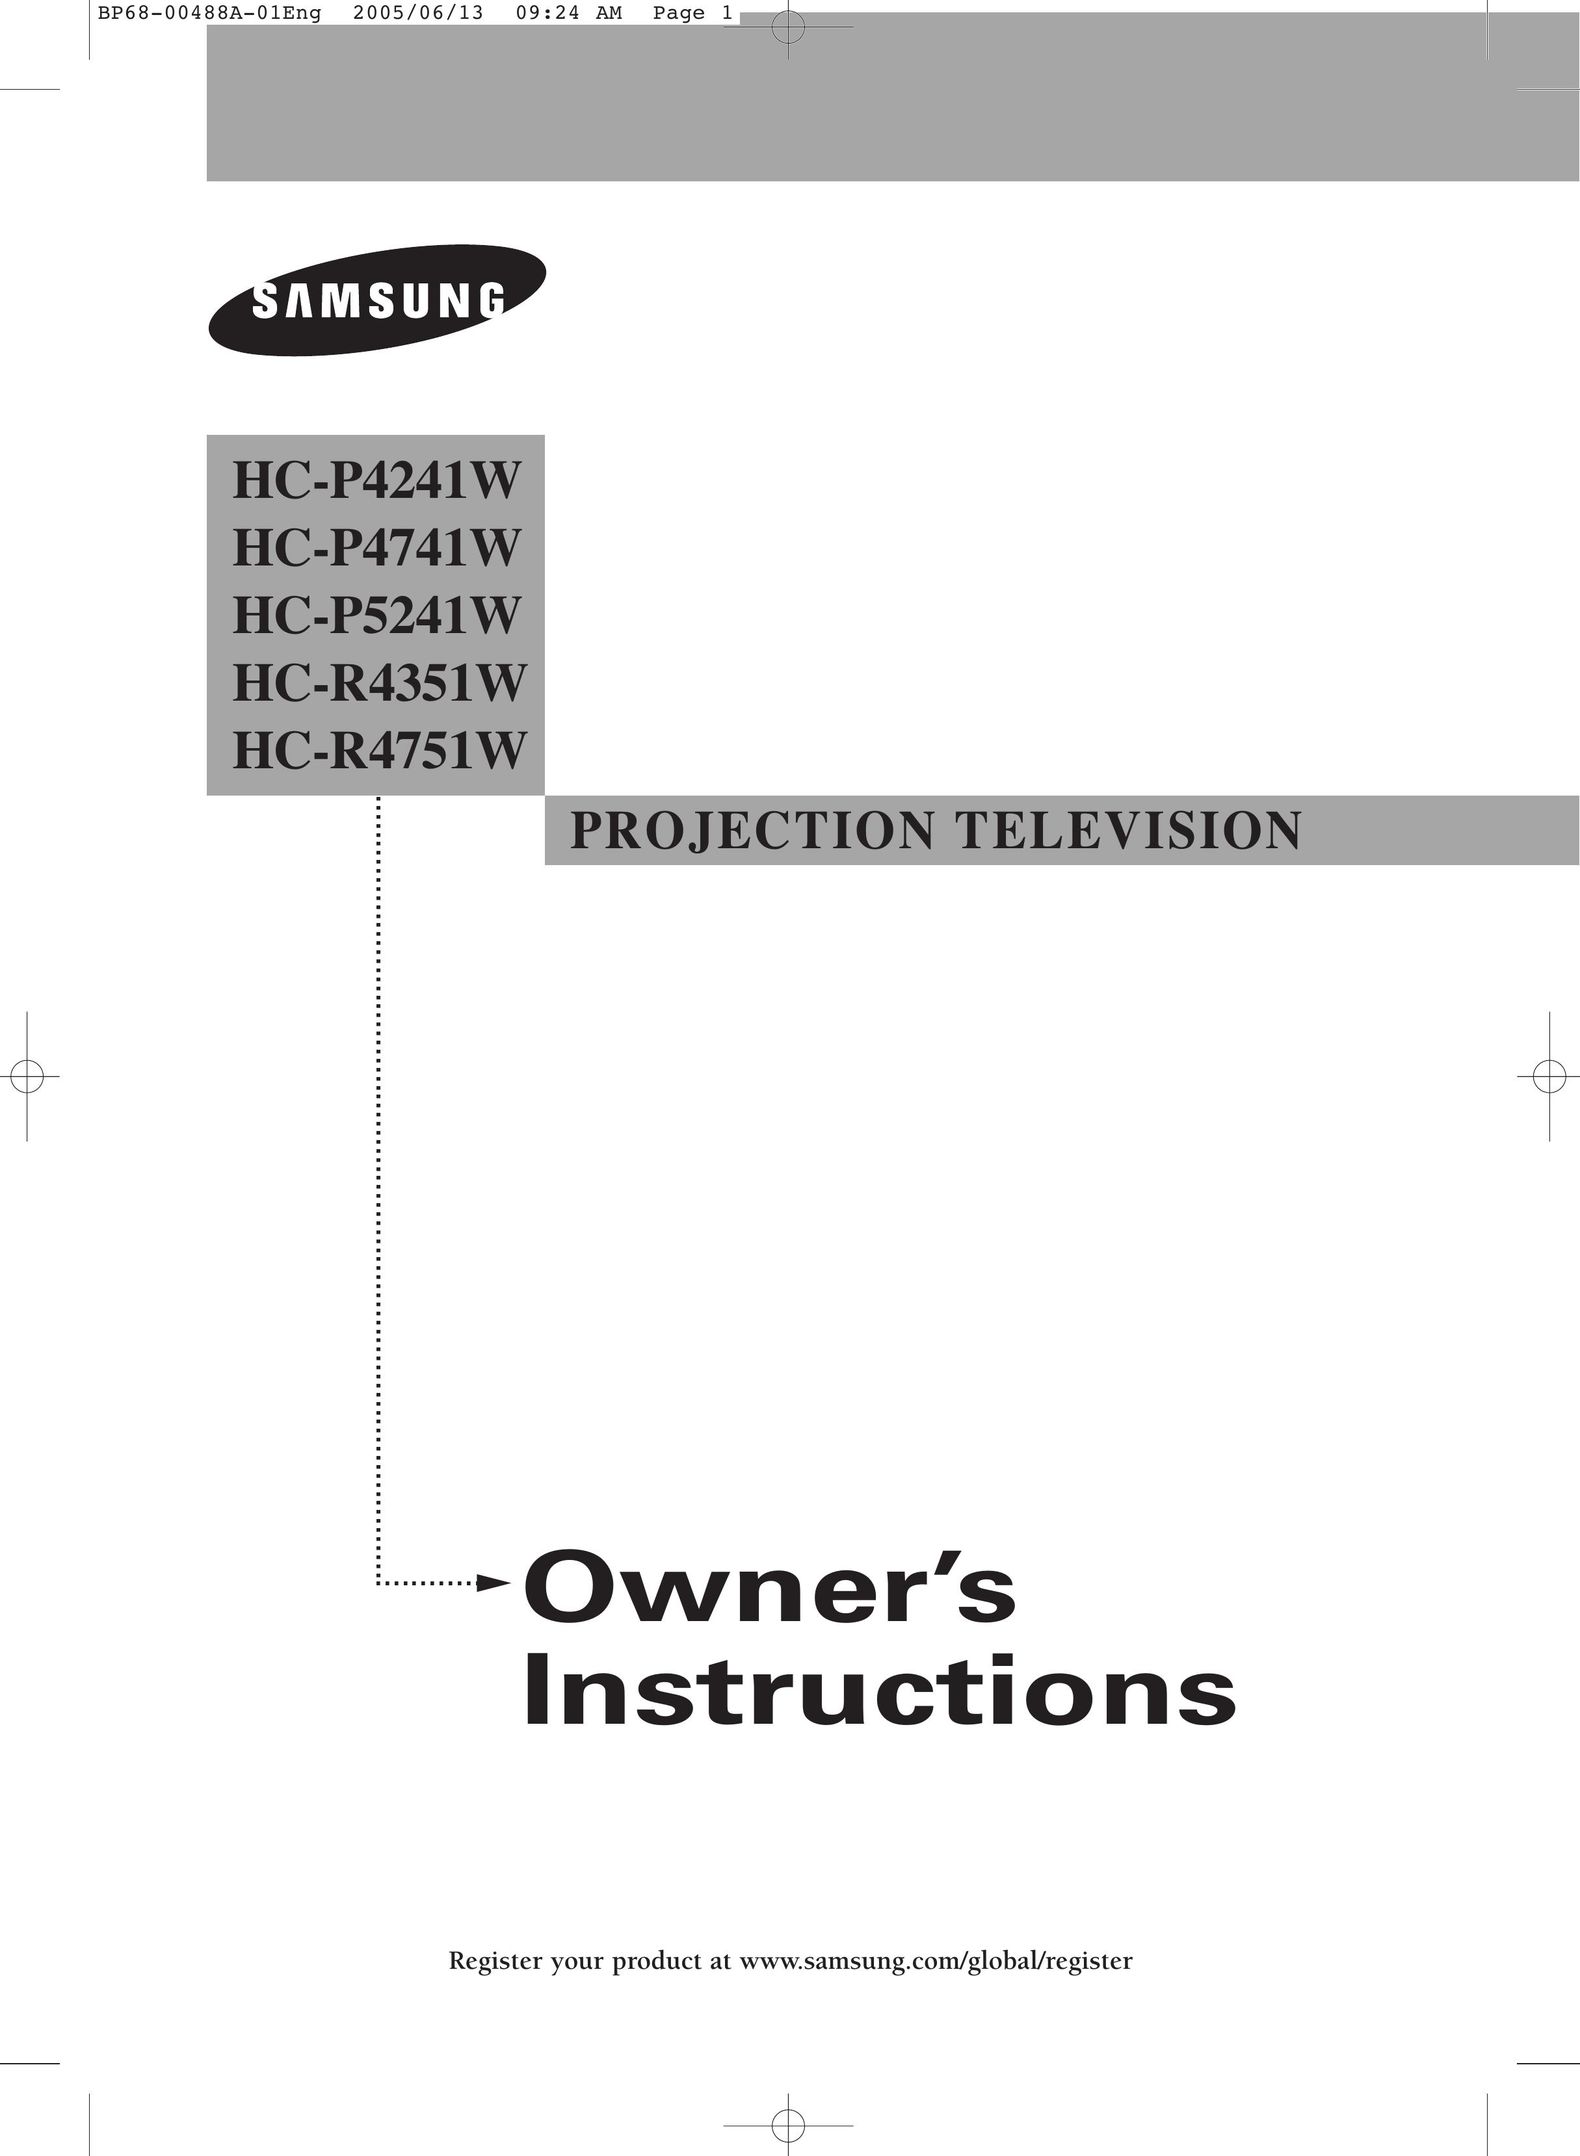 Samsung HC-R4751W Projection Television User Manual